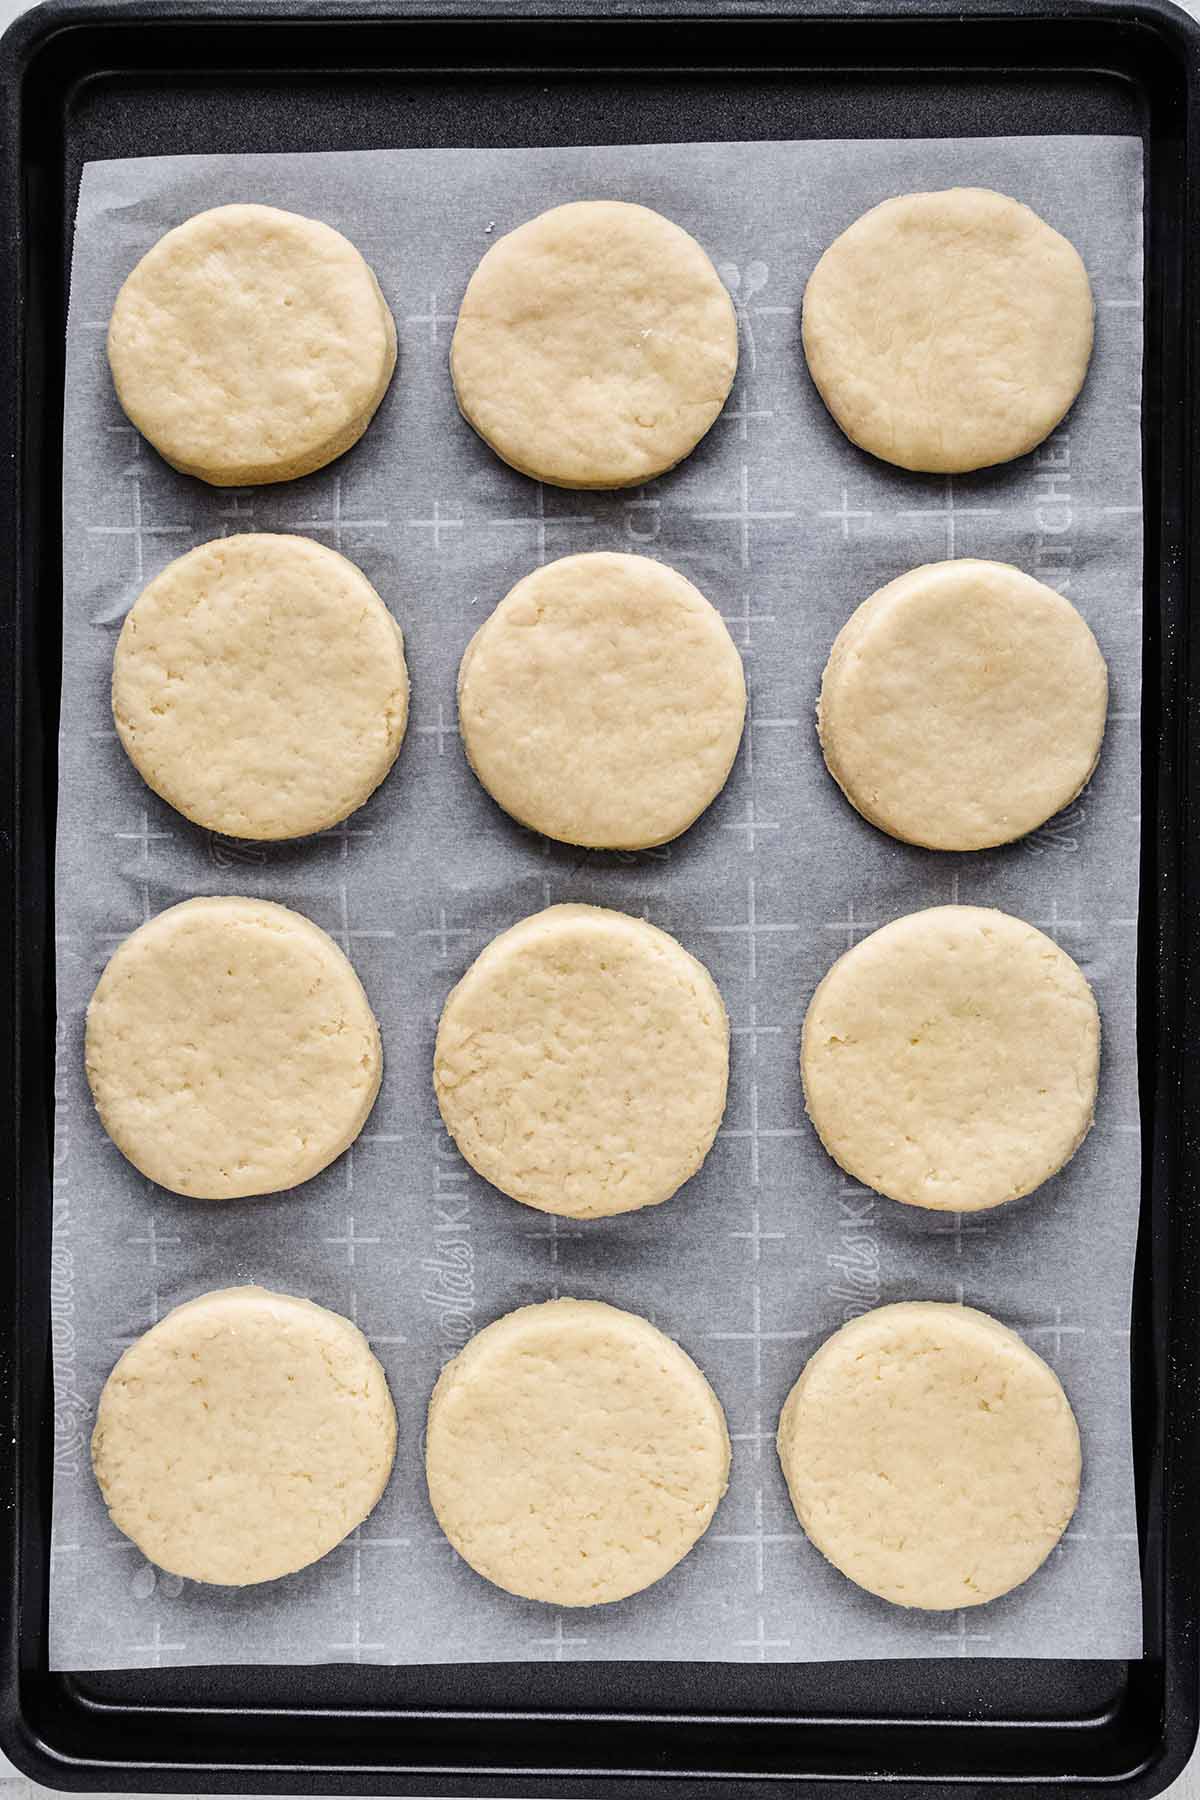 Overhead view of unbaked scones on a baking sheet.